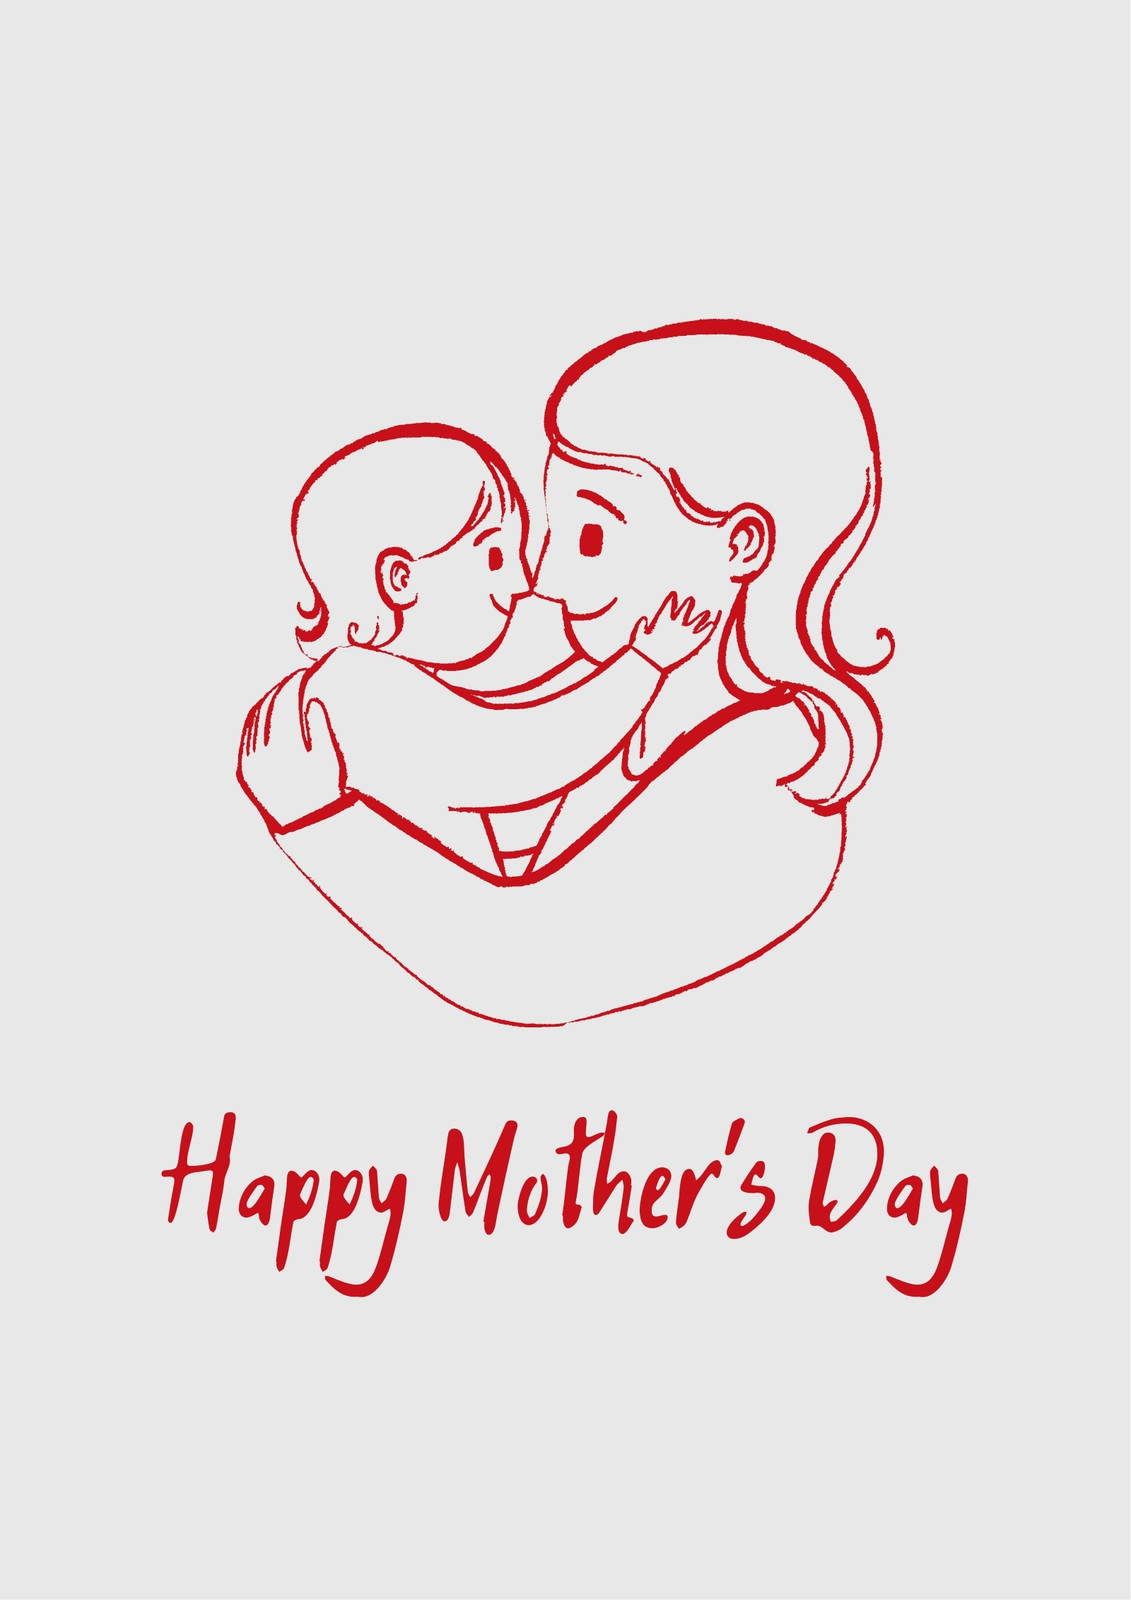 Mothers day drawing / mother day drawing step by step - YouTube